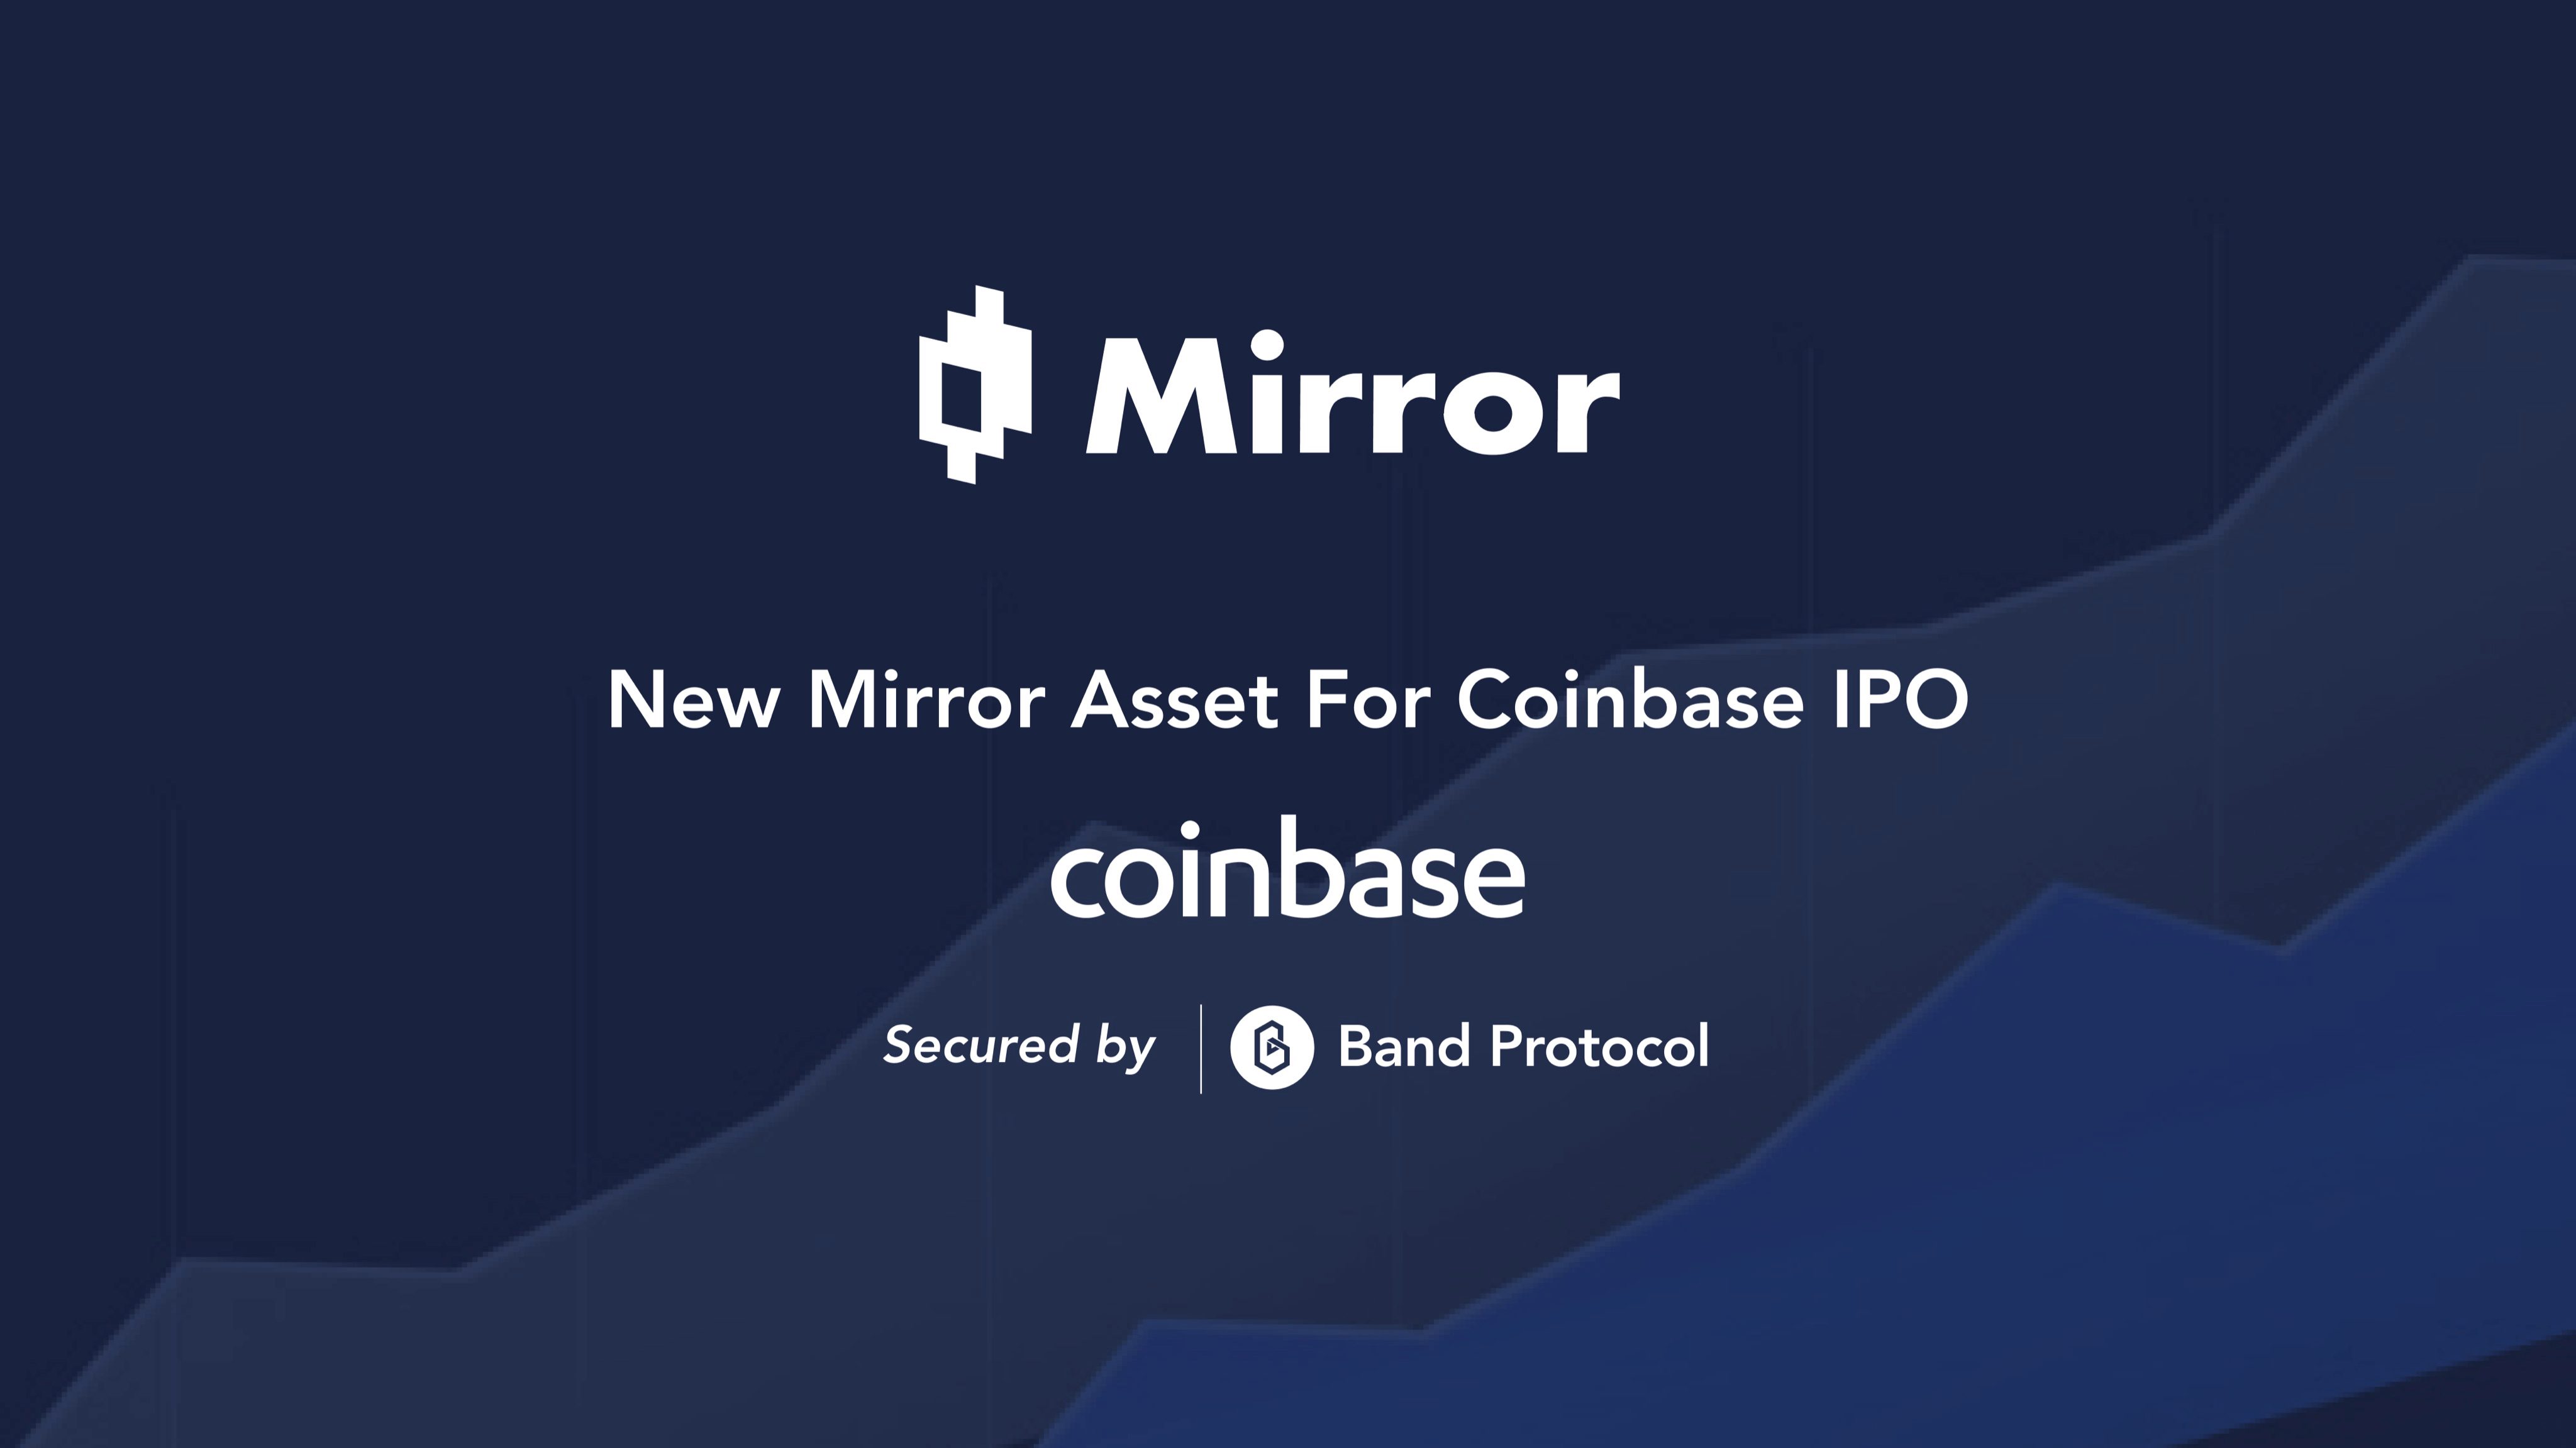 New Mirror Asset for Coinbase IPO